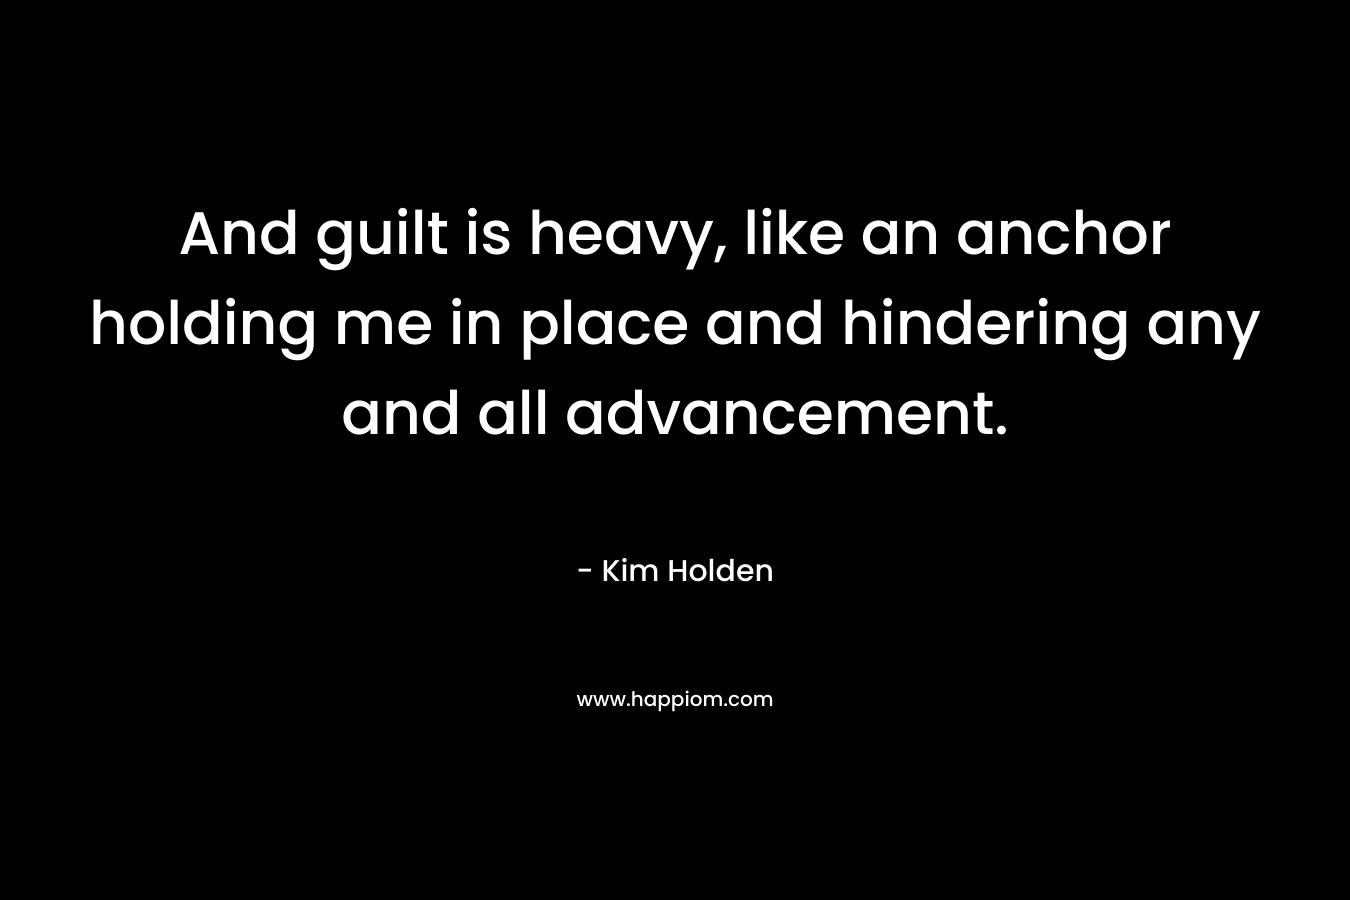 And guilt is heavy, like an anchor holding me in place and hindering any and all advancement. – Kim Holden